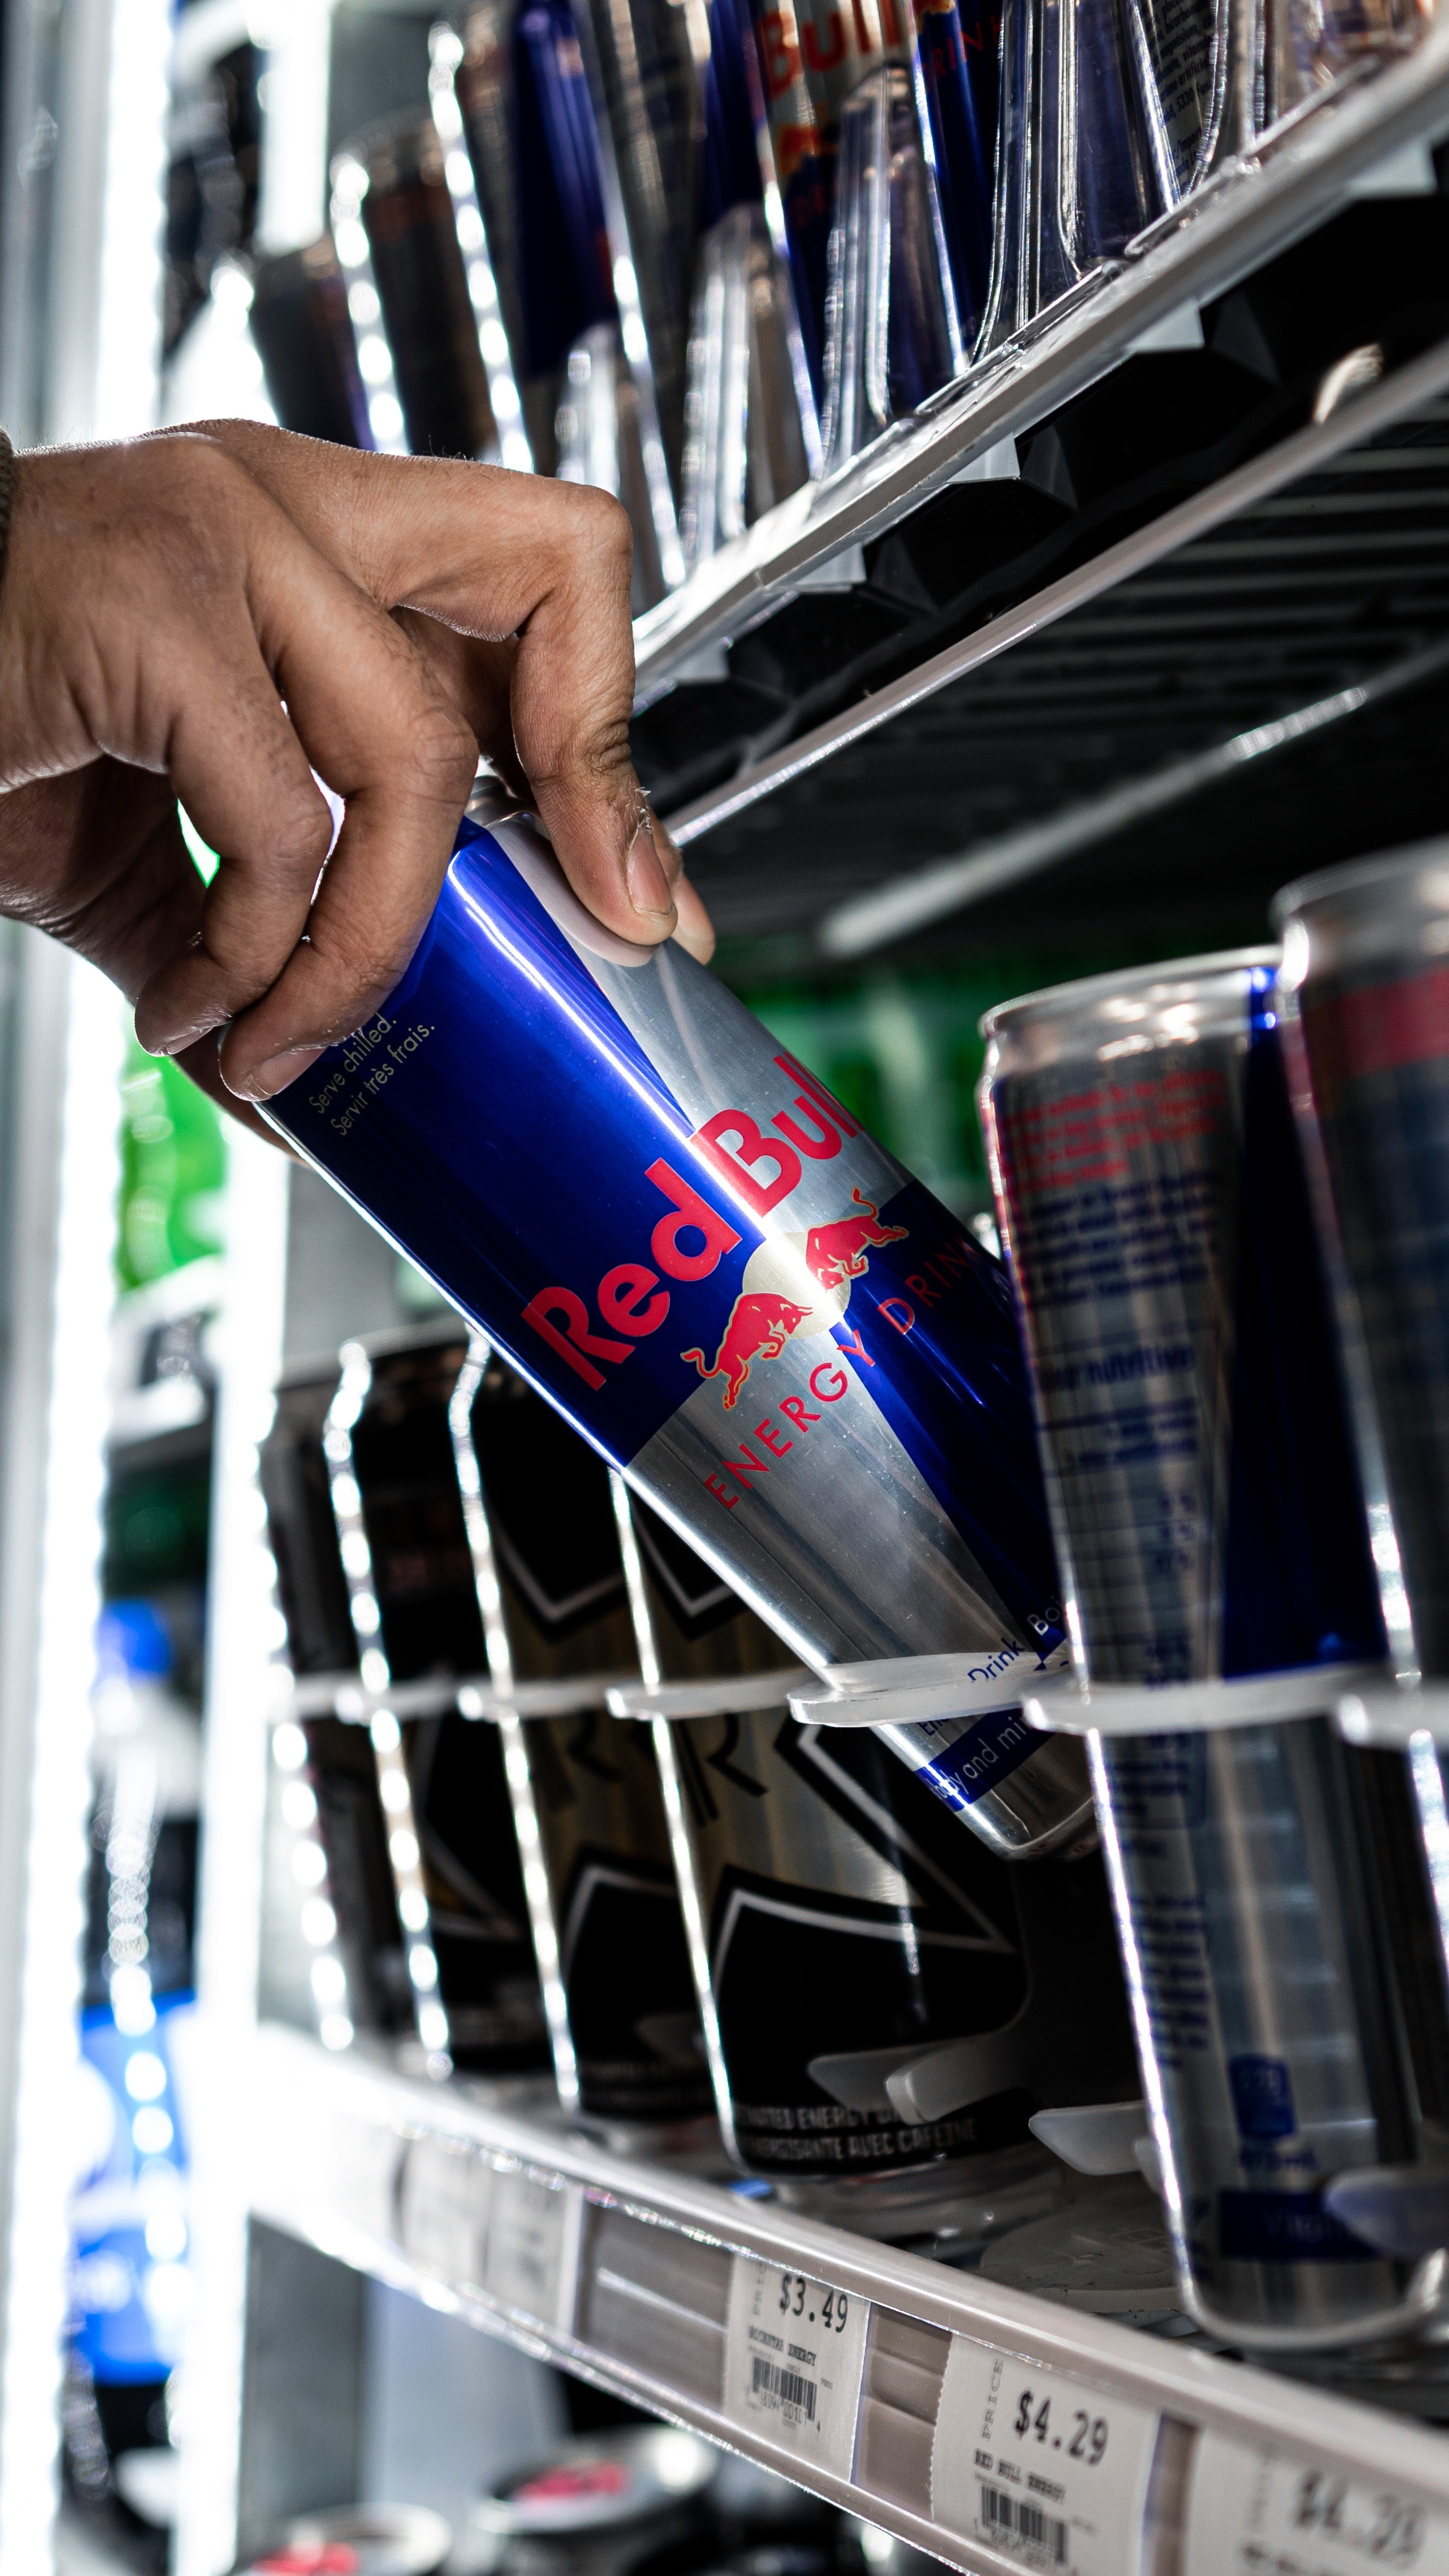 Deep Most Drink] [A World\'s Red Bull Energy Popular Into Dive The